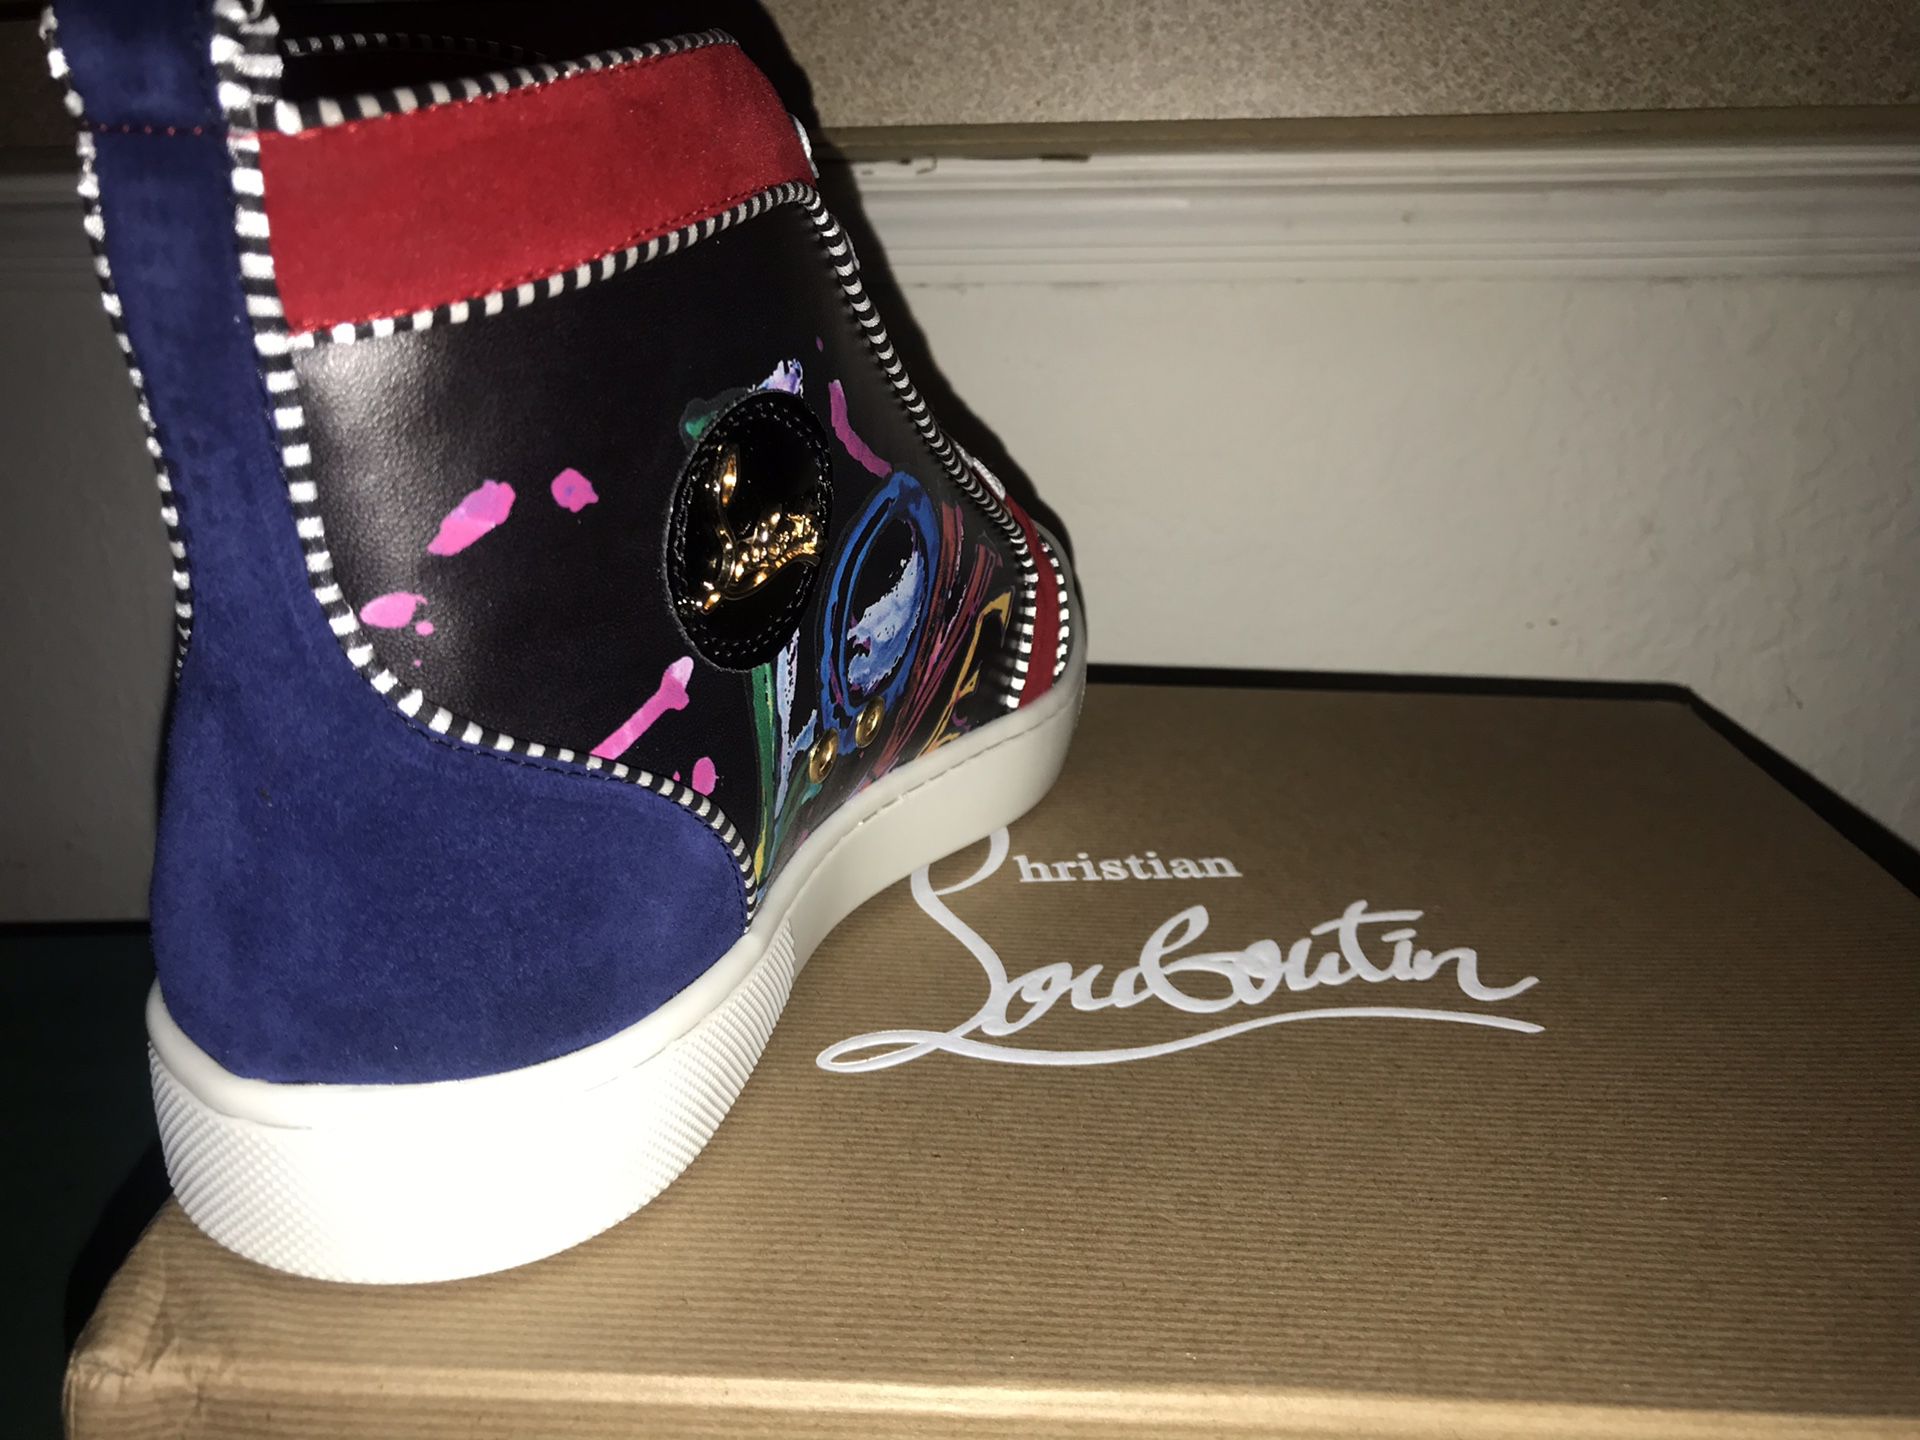  Shop Christian Louboutin for Men, Stylish Must-haves